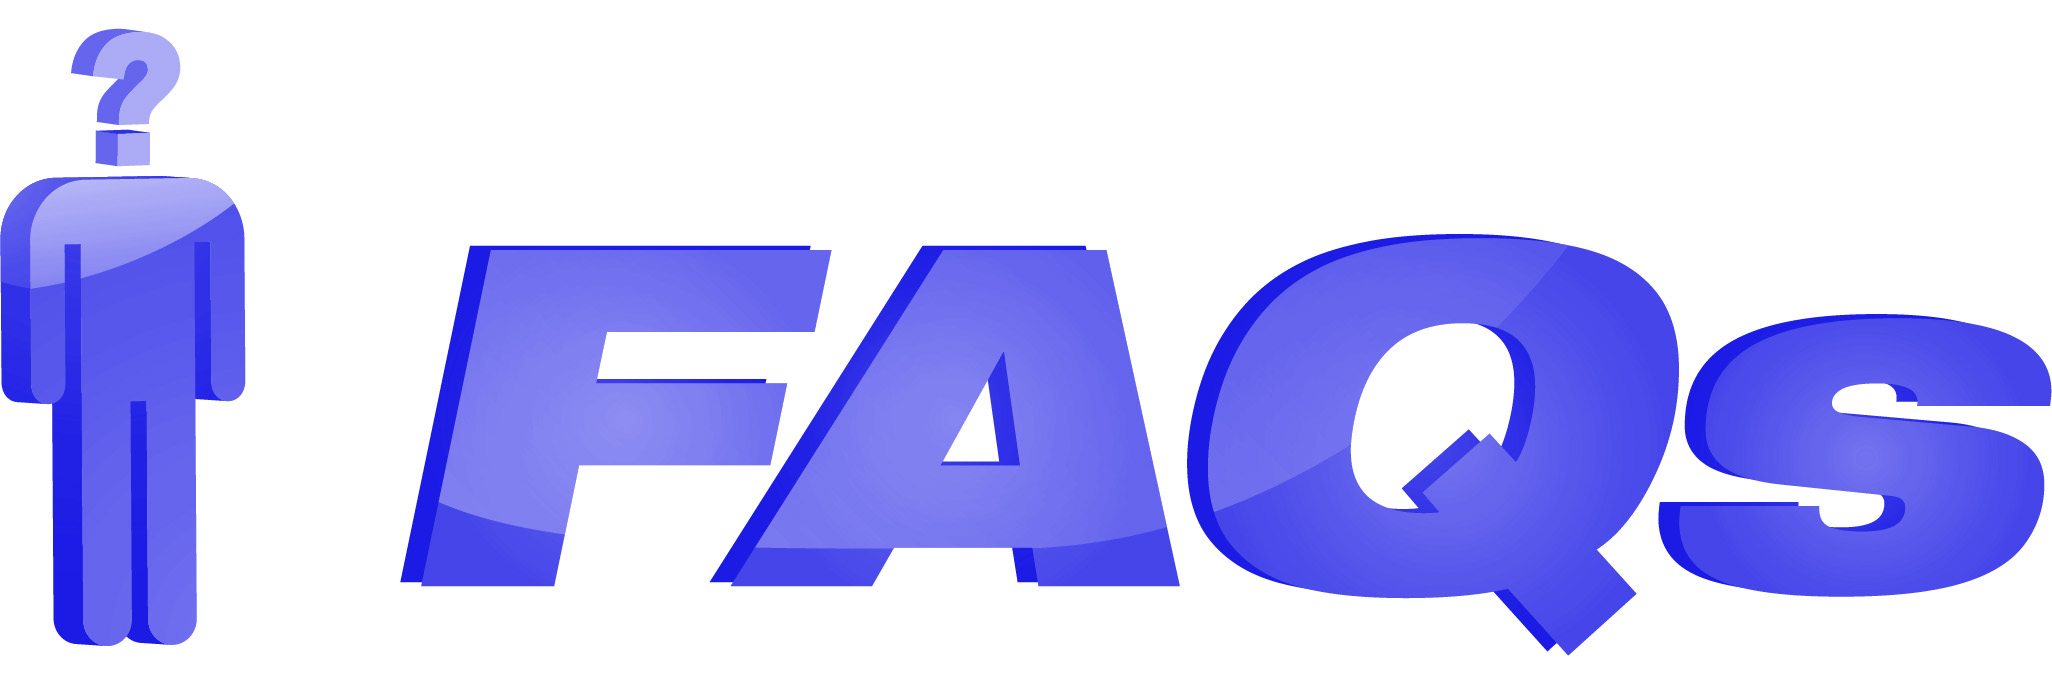 Frequently Asked Questions_ACT Access Control